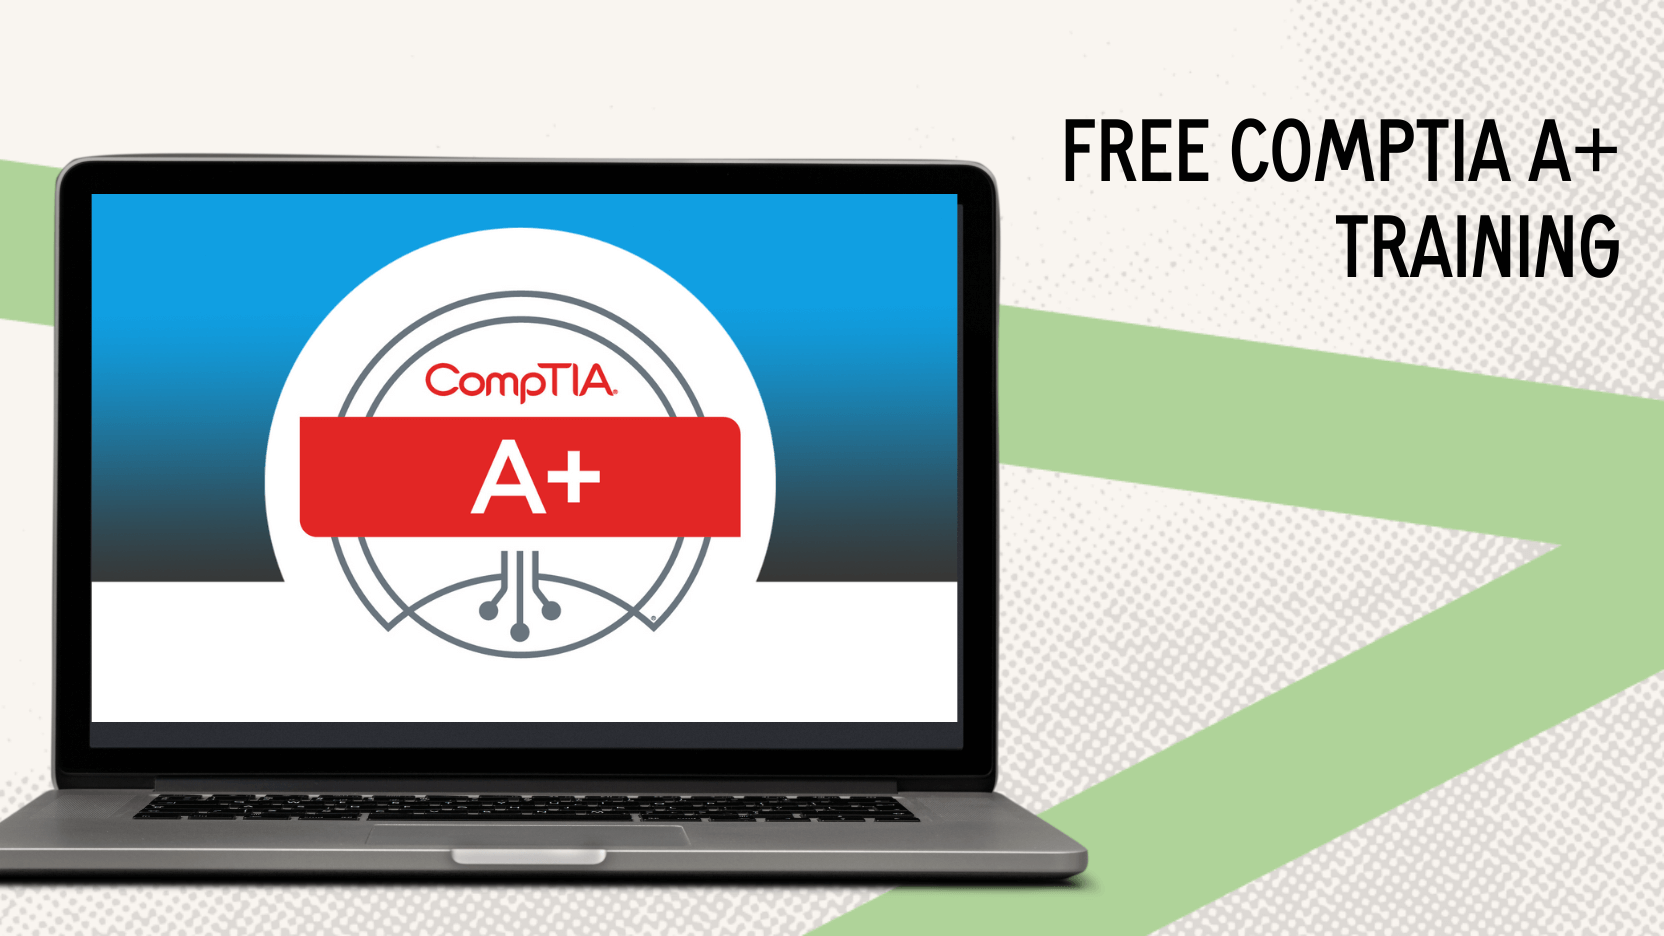 Where Can I Get Free CompTIA A+ Training?